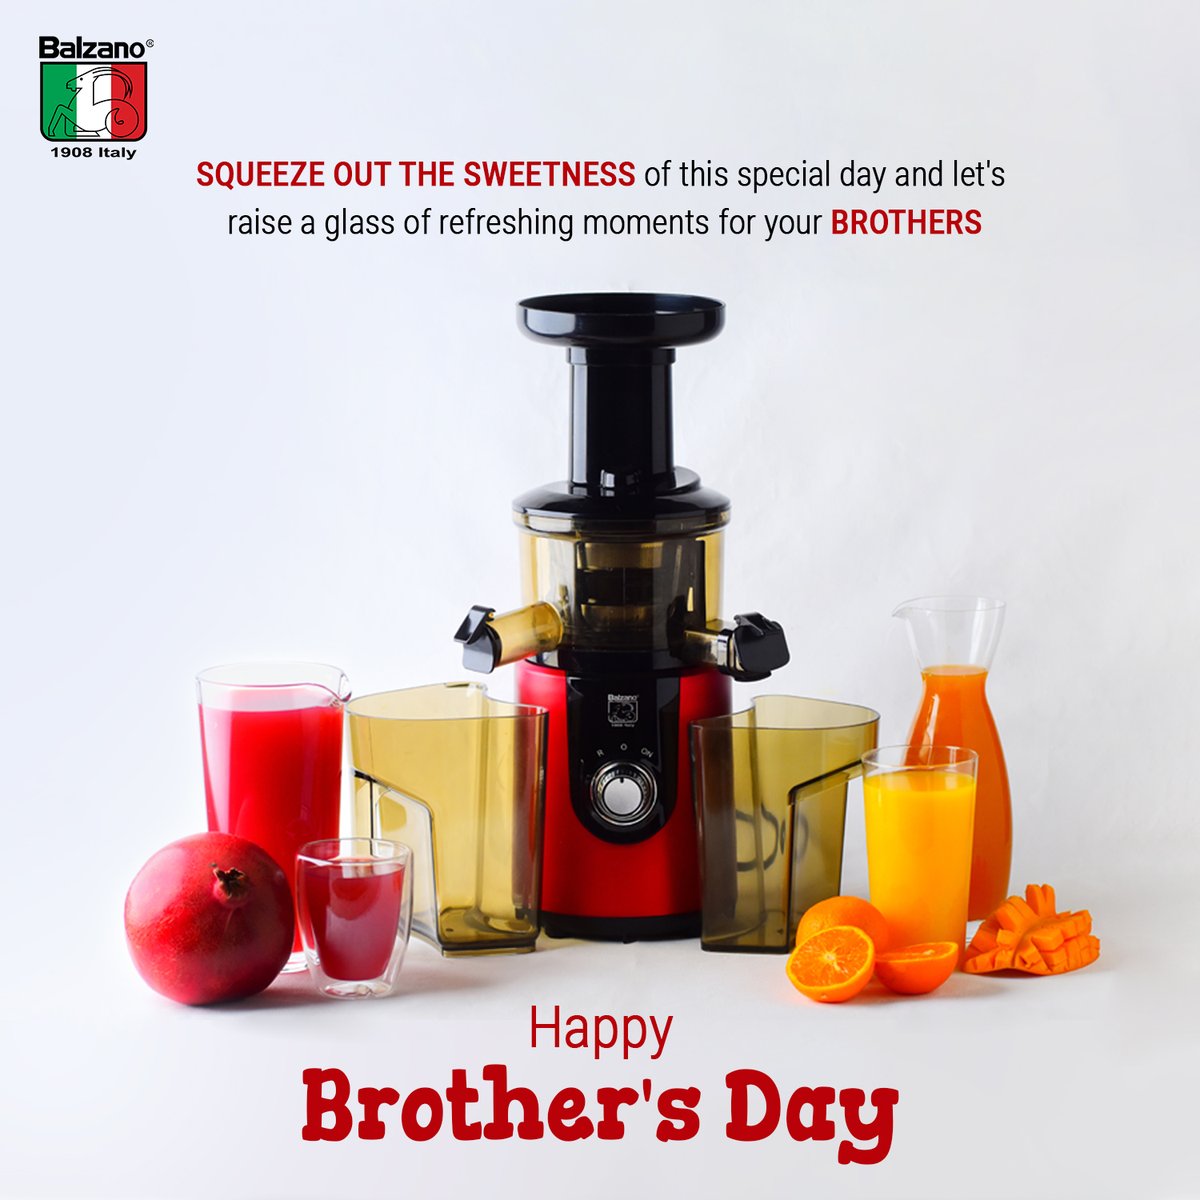 Let's sweeten up this Brother's Day with a flavorful blends and unforgettable moments together.
.
.
.
#BalzanoIndia
#HealthyStylishLife
.
.
.
 #KitchenGadgets #KitchenEssentials #balzanoslowjuicer #brothersday2023 #BrothersDayCelebration #smoothies #juices #shakes #blenditup